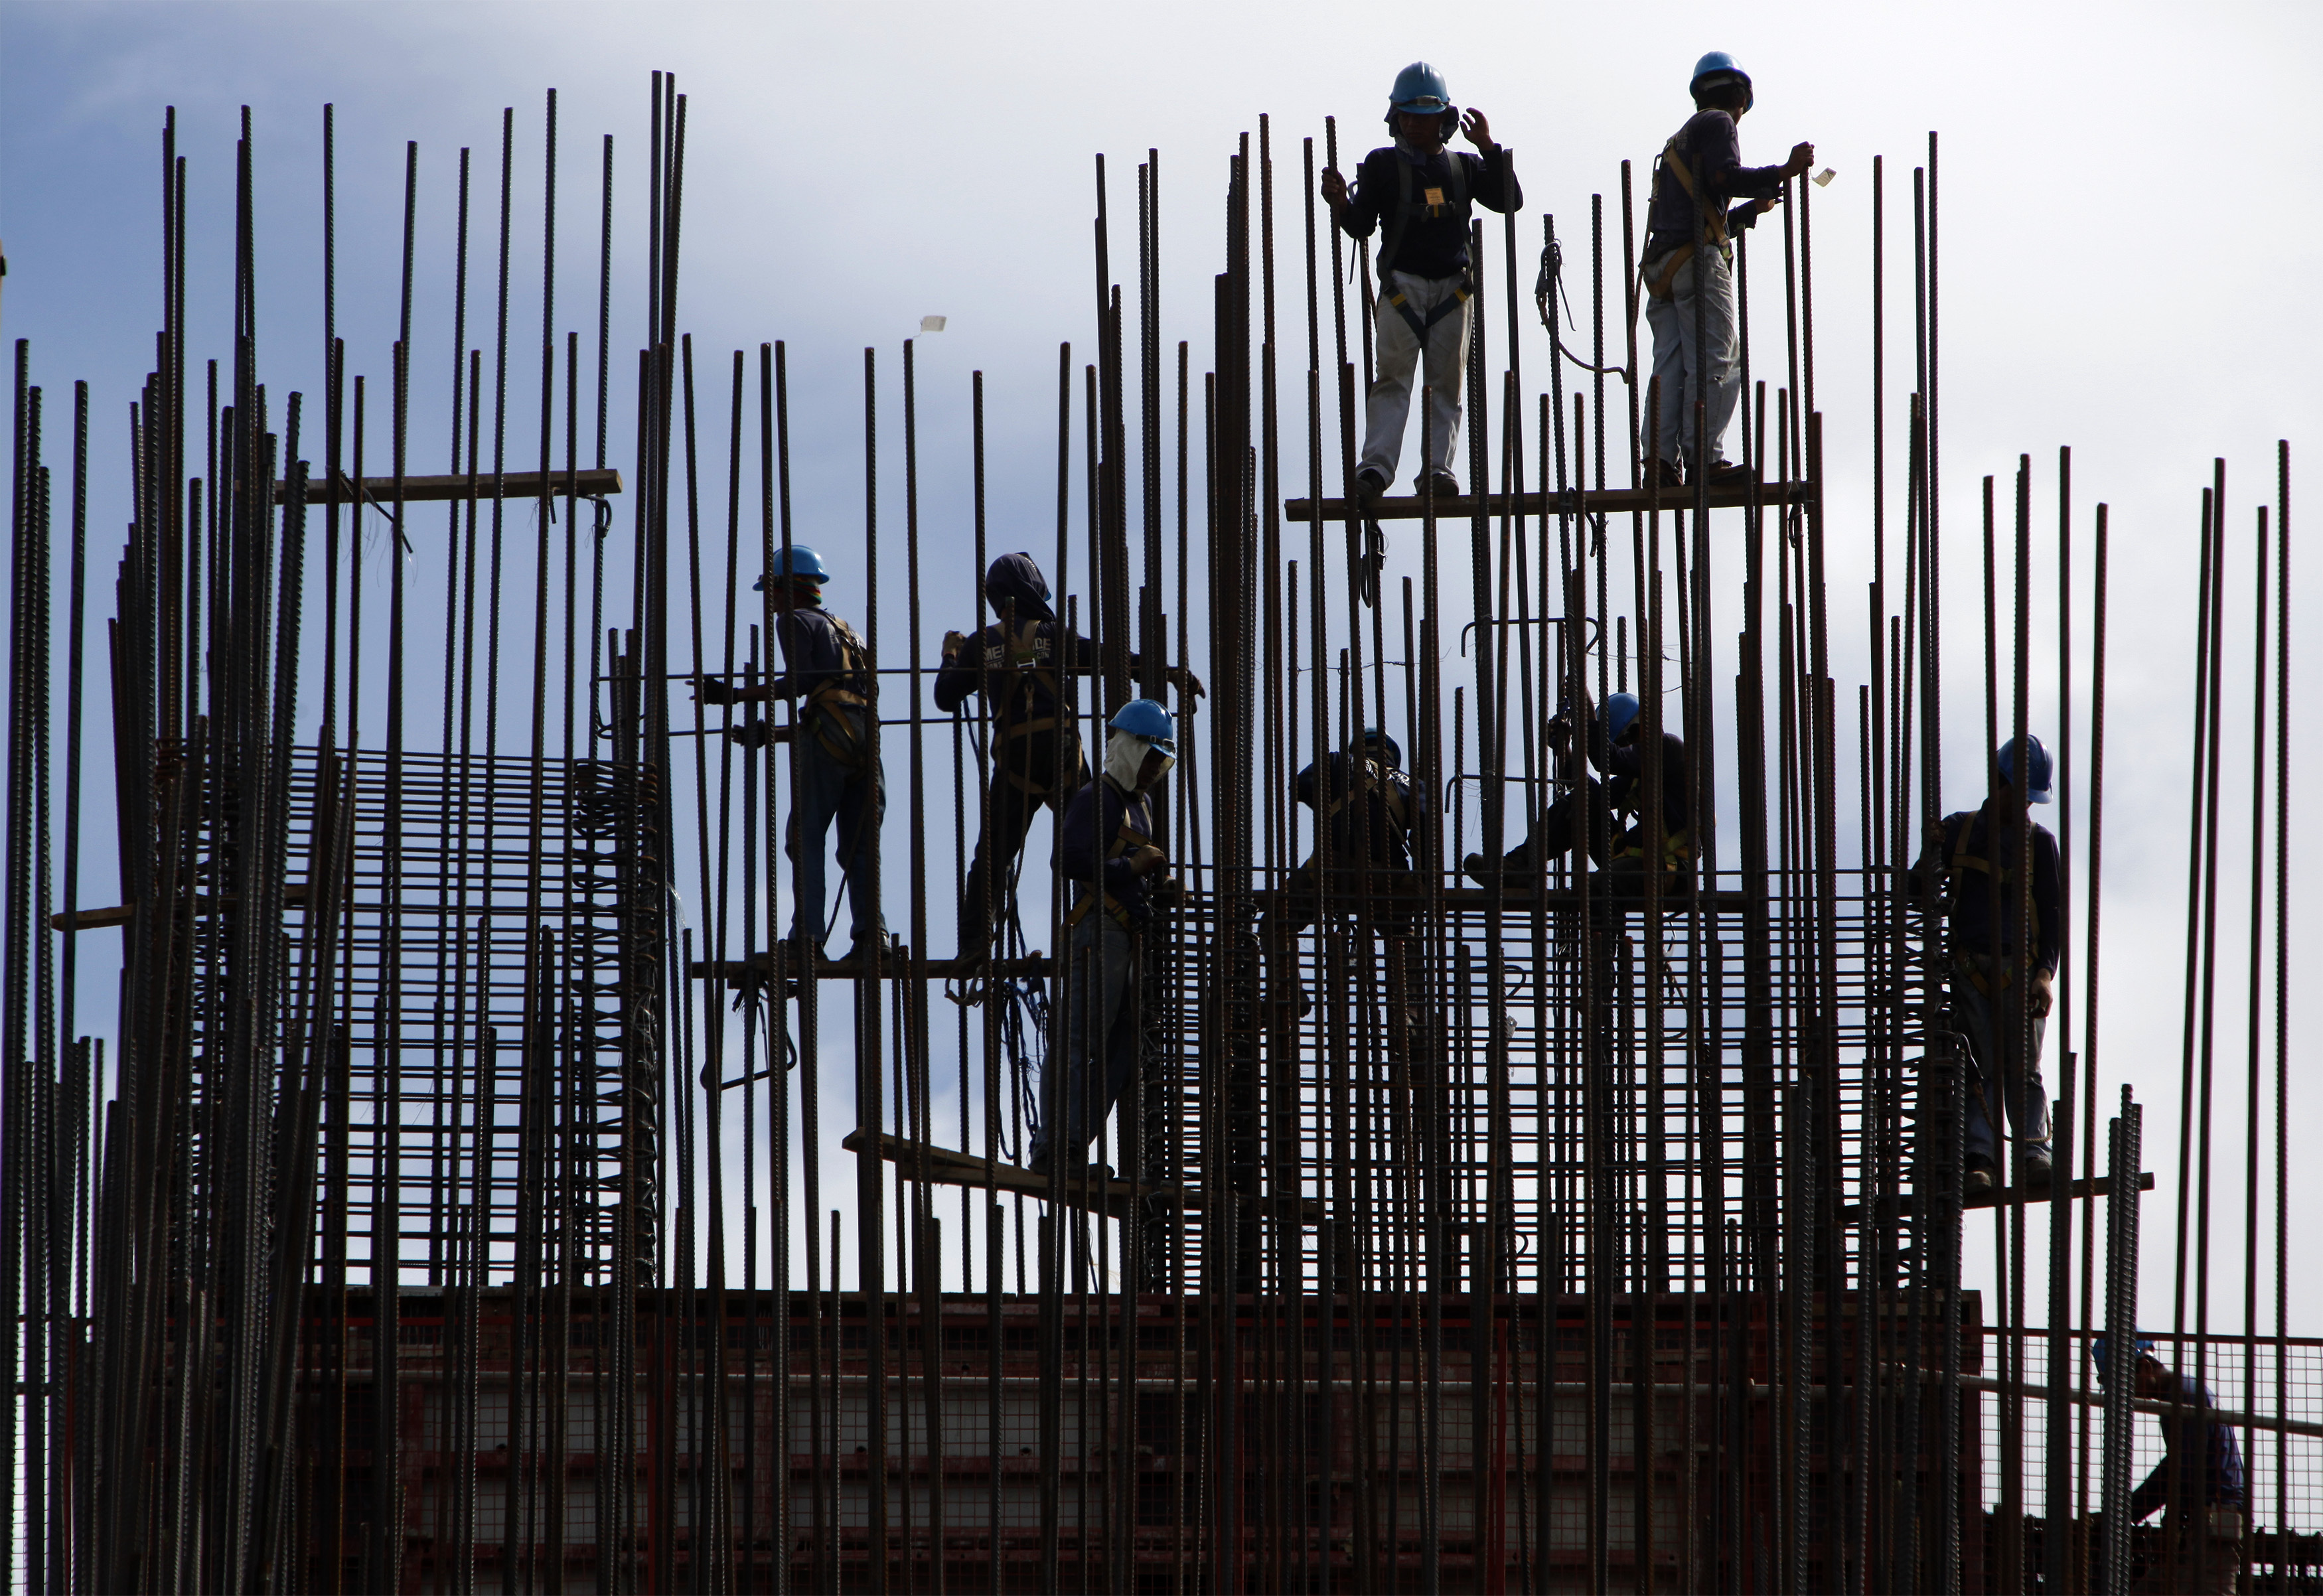 Construction workers prepare steel bars before cement is poured at a building project